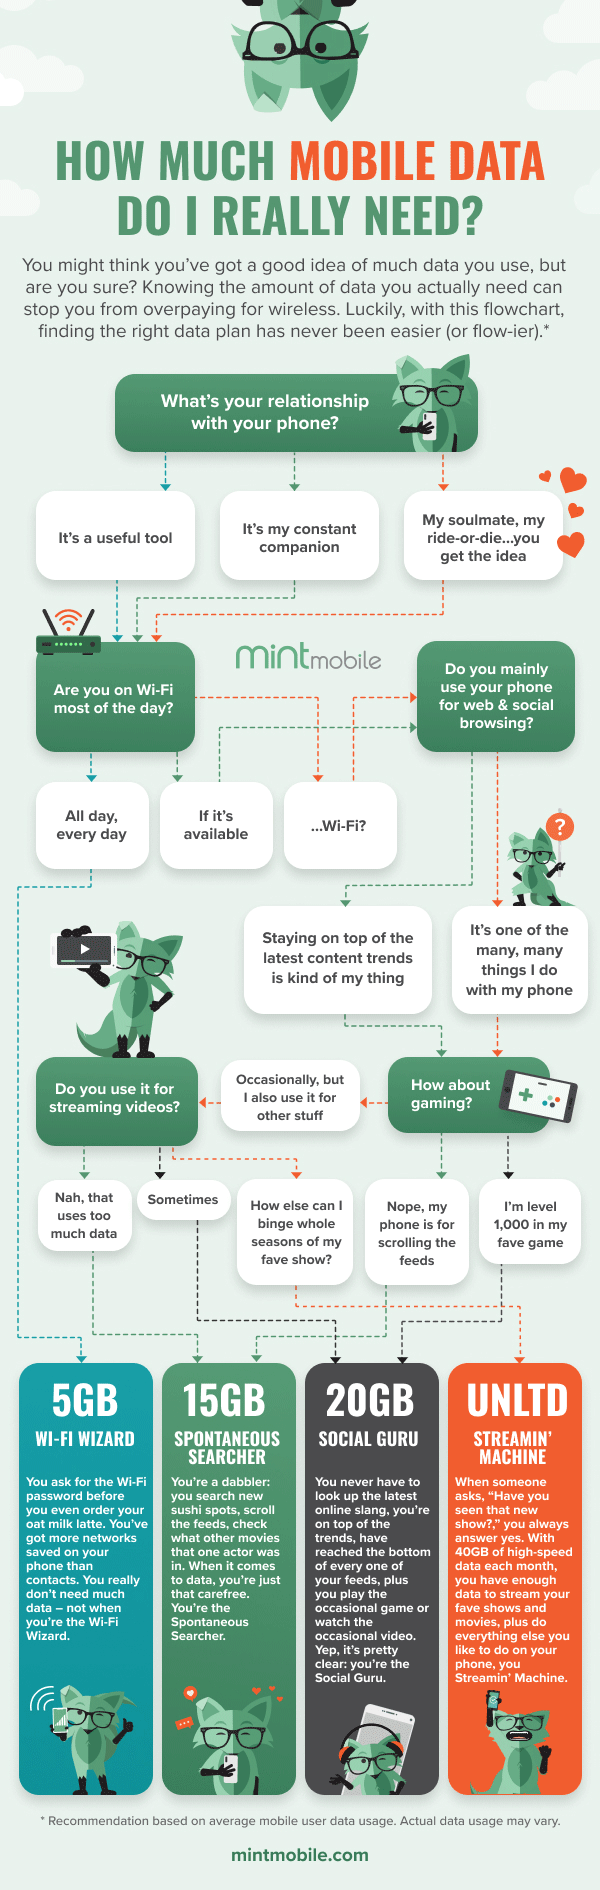 How much mobile data do I really need? - flowchart to help people find the right data plan for them